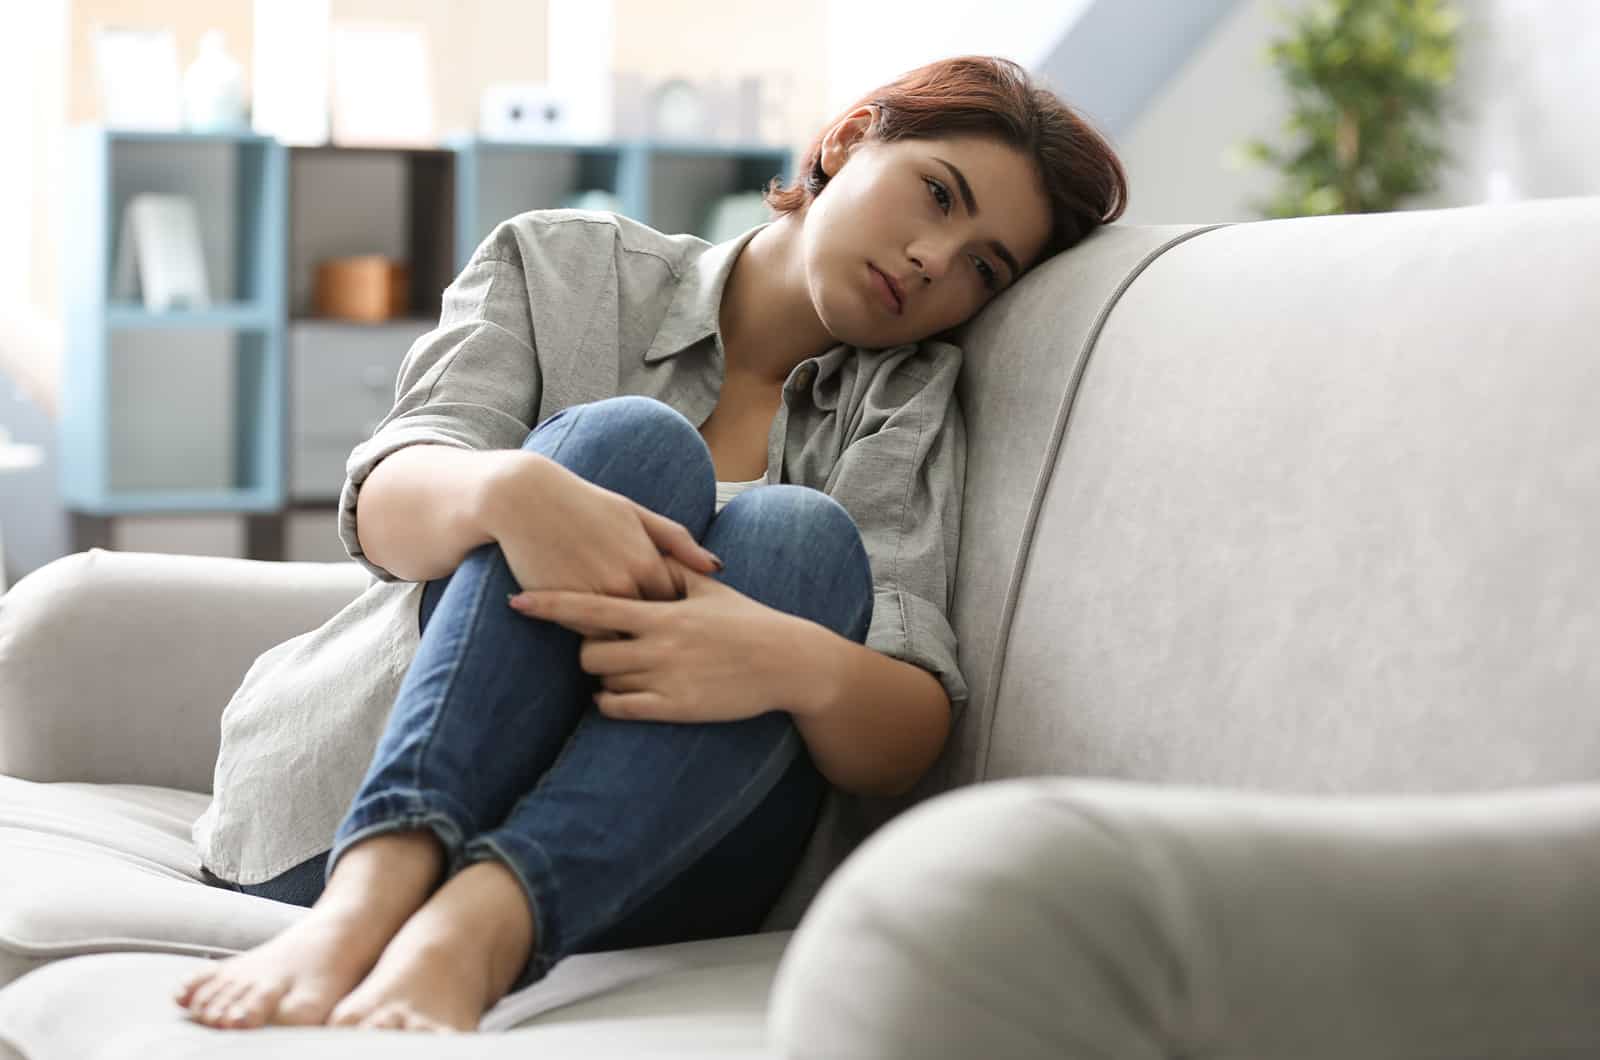 woman sitting on couch tired of begging for attention